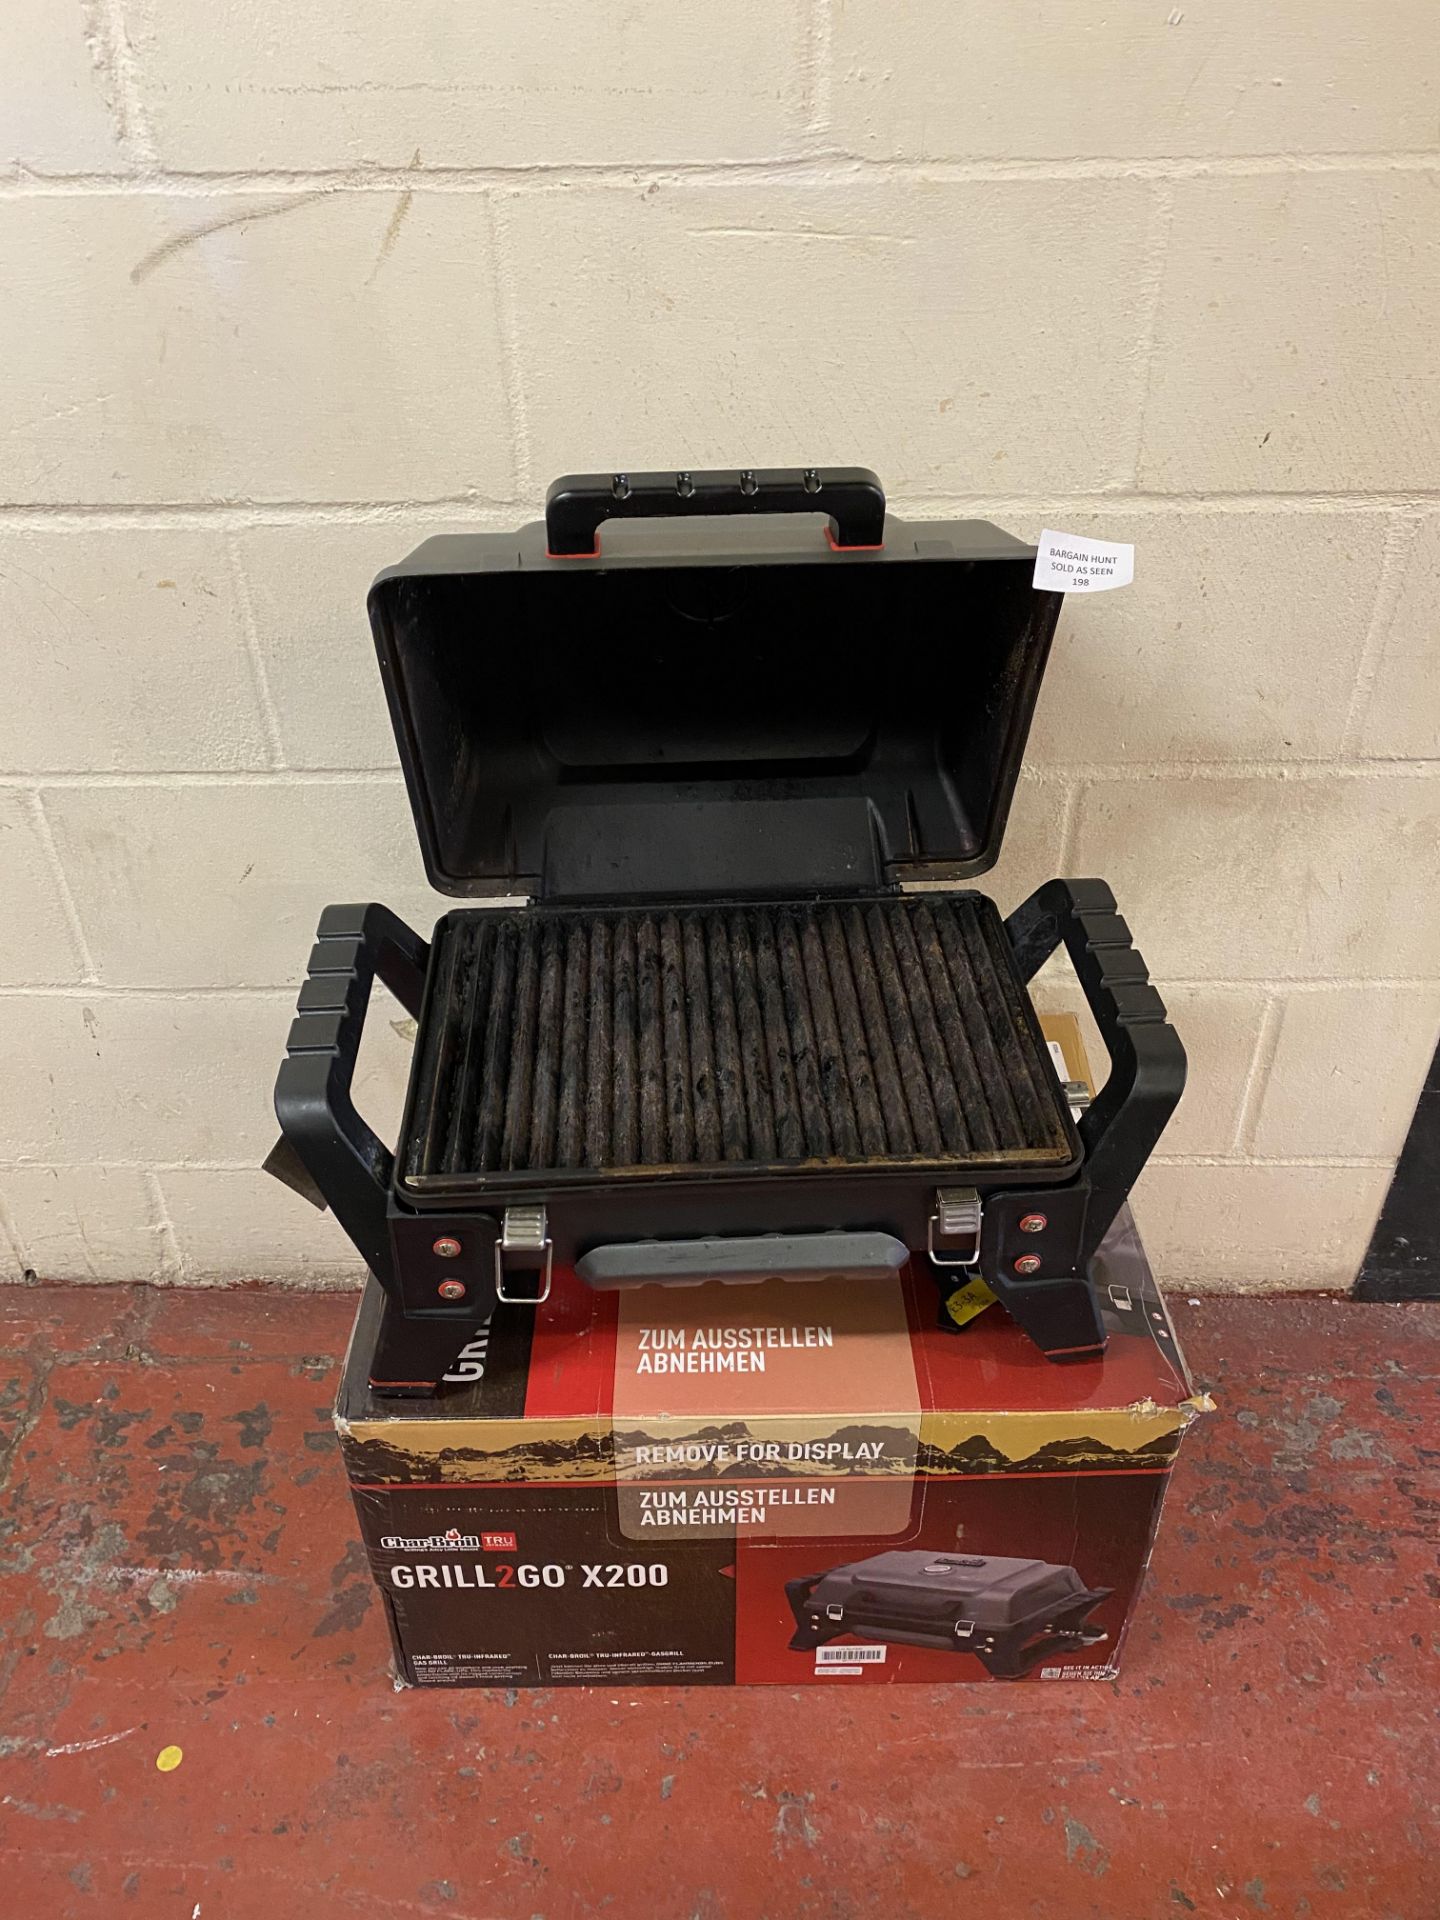 Char-Broil X200 Grill2Go Portable BBQ Grill (heavely used, see image) RRP £120 - Image 3 of 3